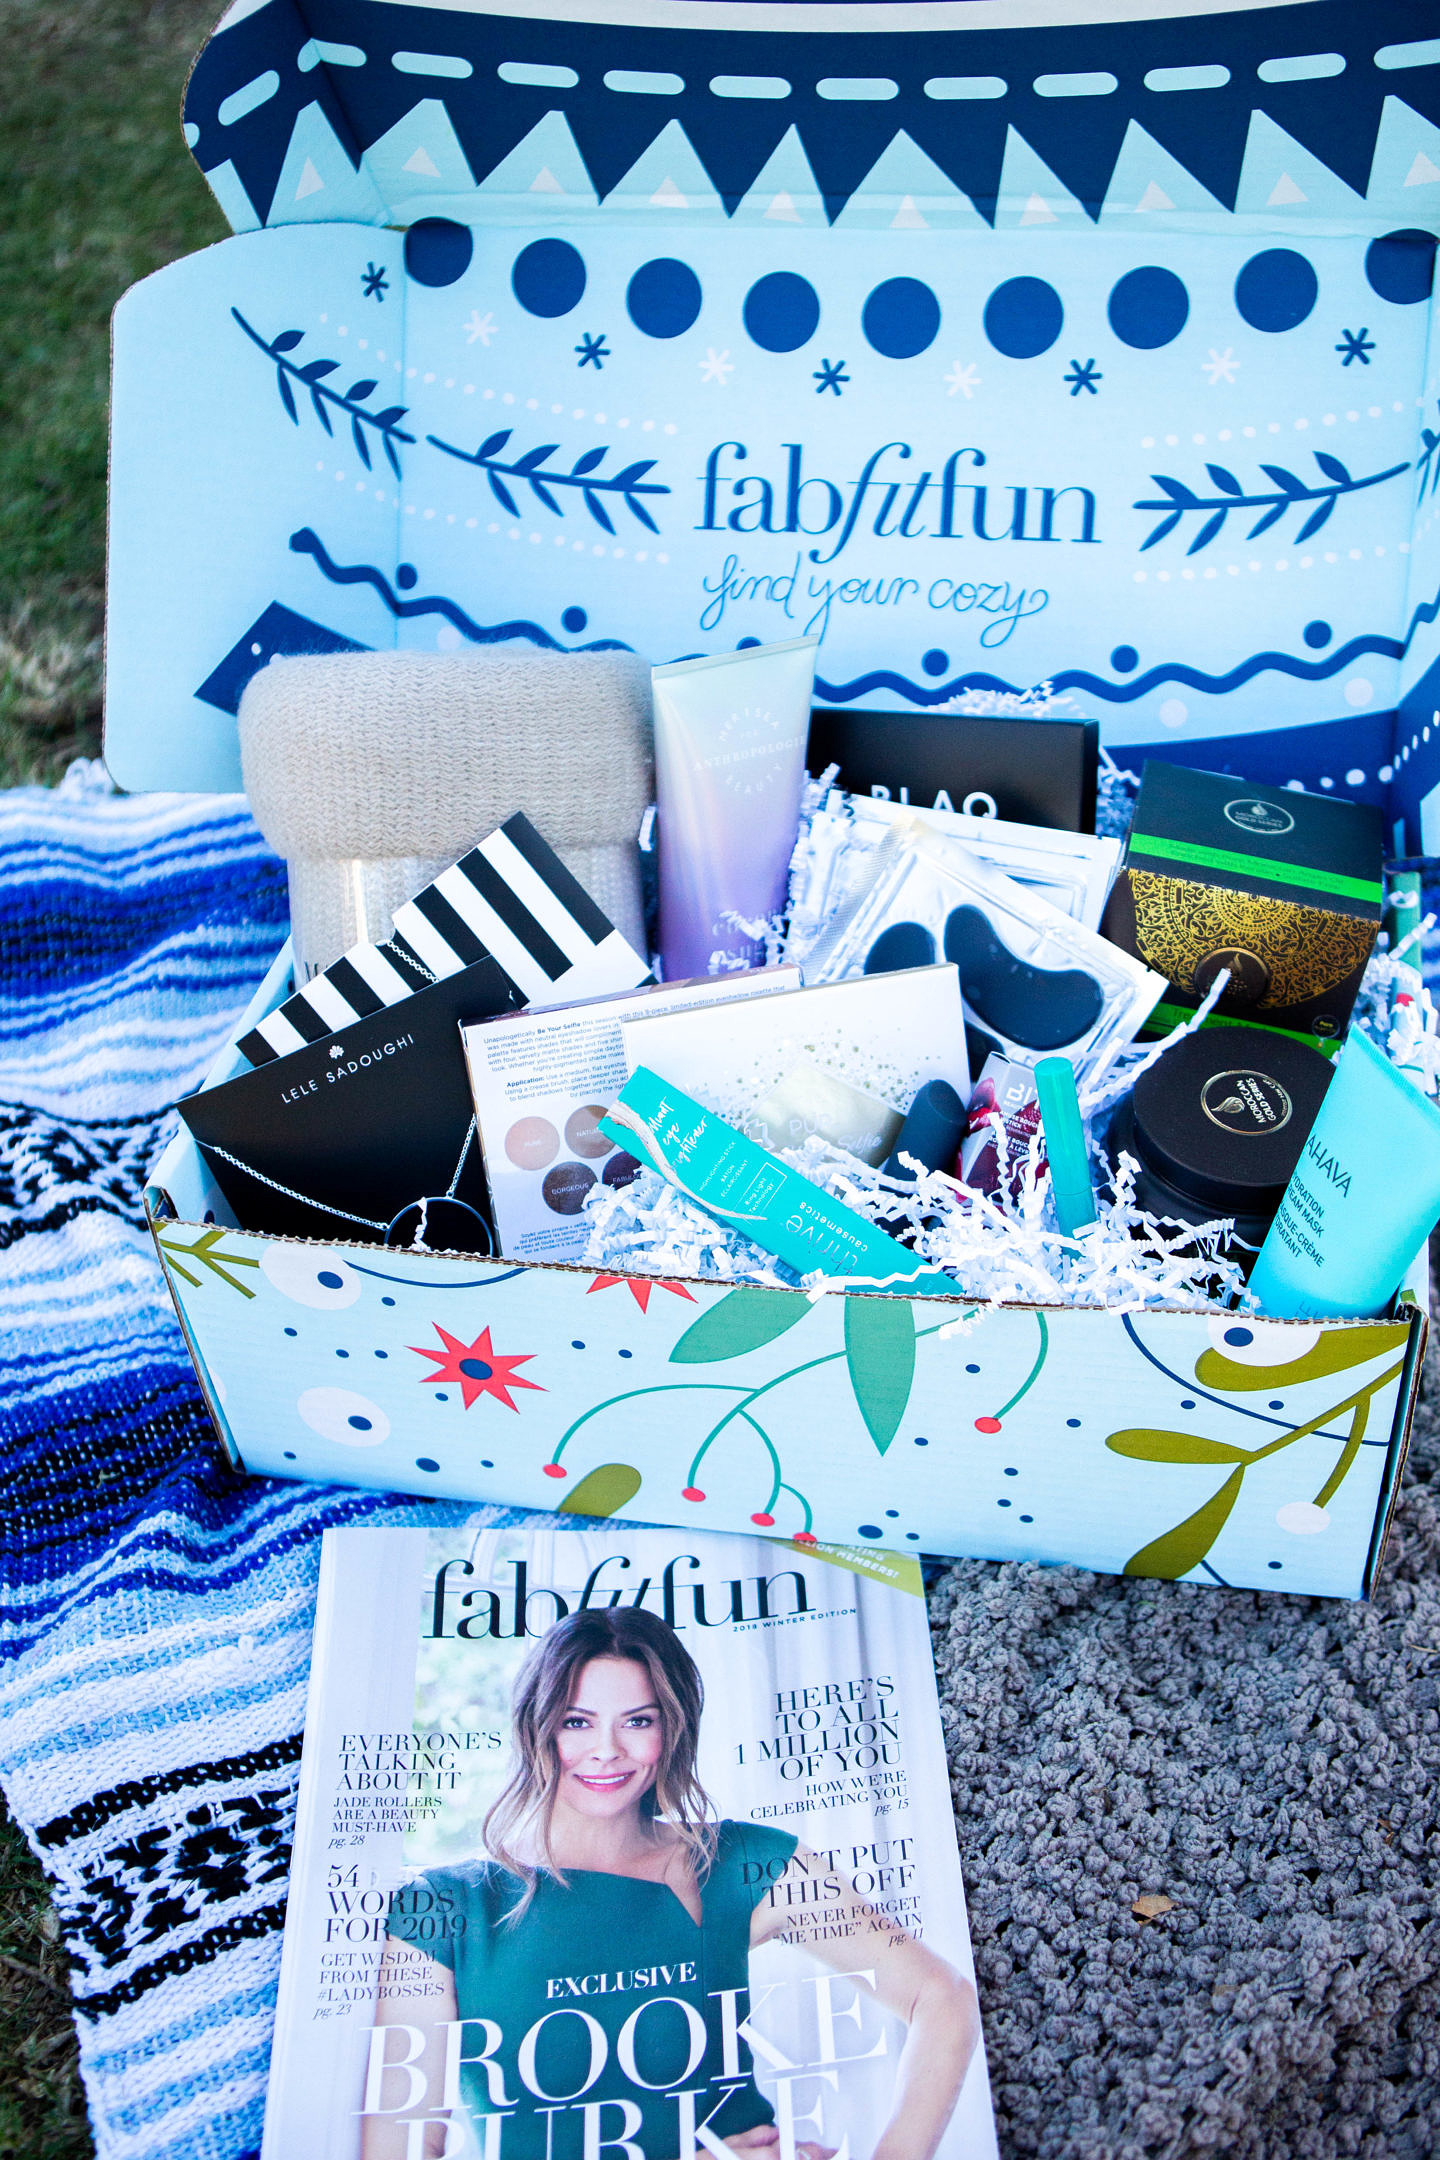 Bookmark this post ASAP if you have been wondering about the FabFitFun box! Orange County Blogger Debbie Savage is sharing why the FabFitFun Winter Box is her favorite delivery this season. See why here!